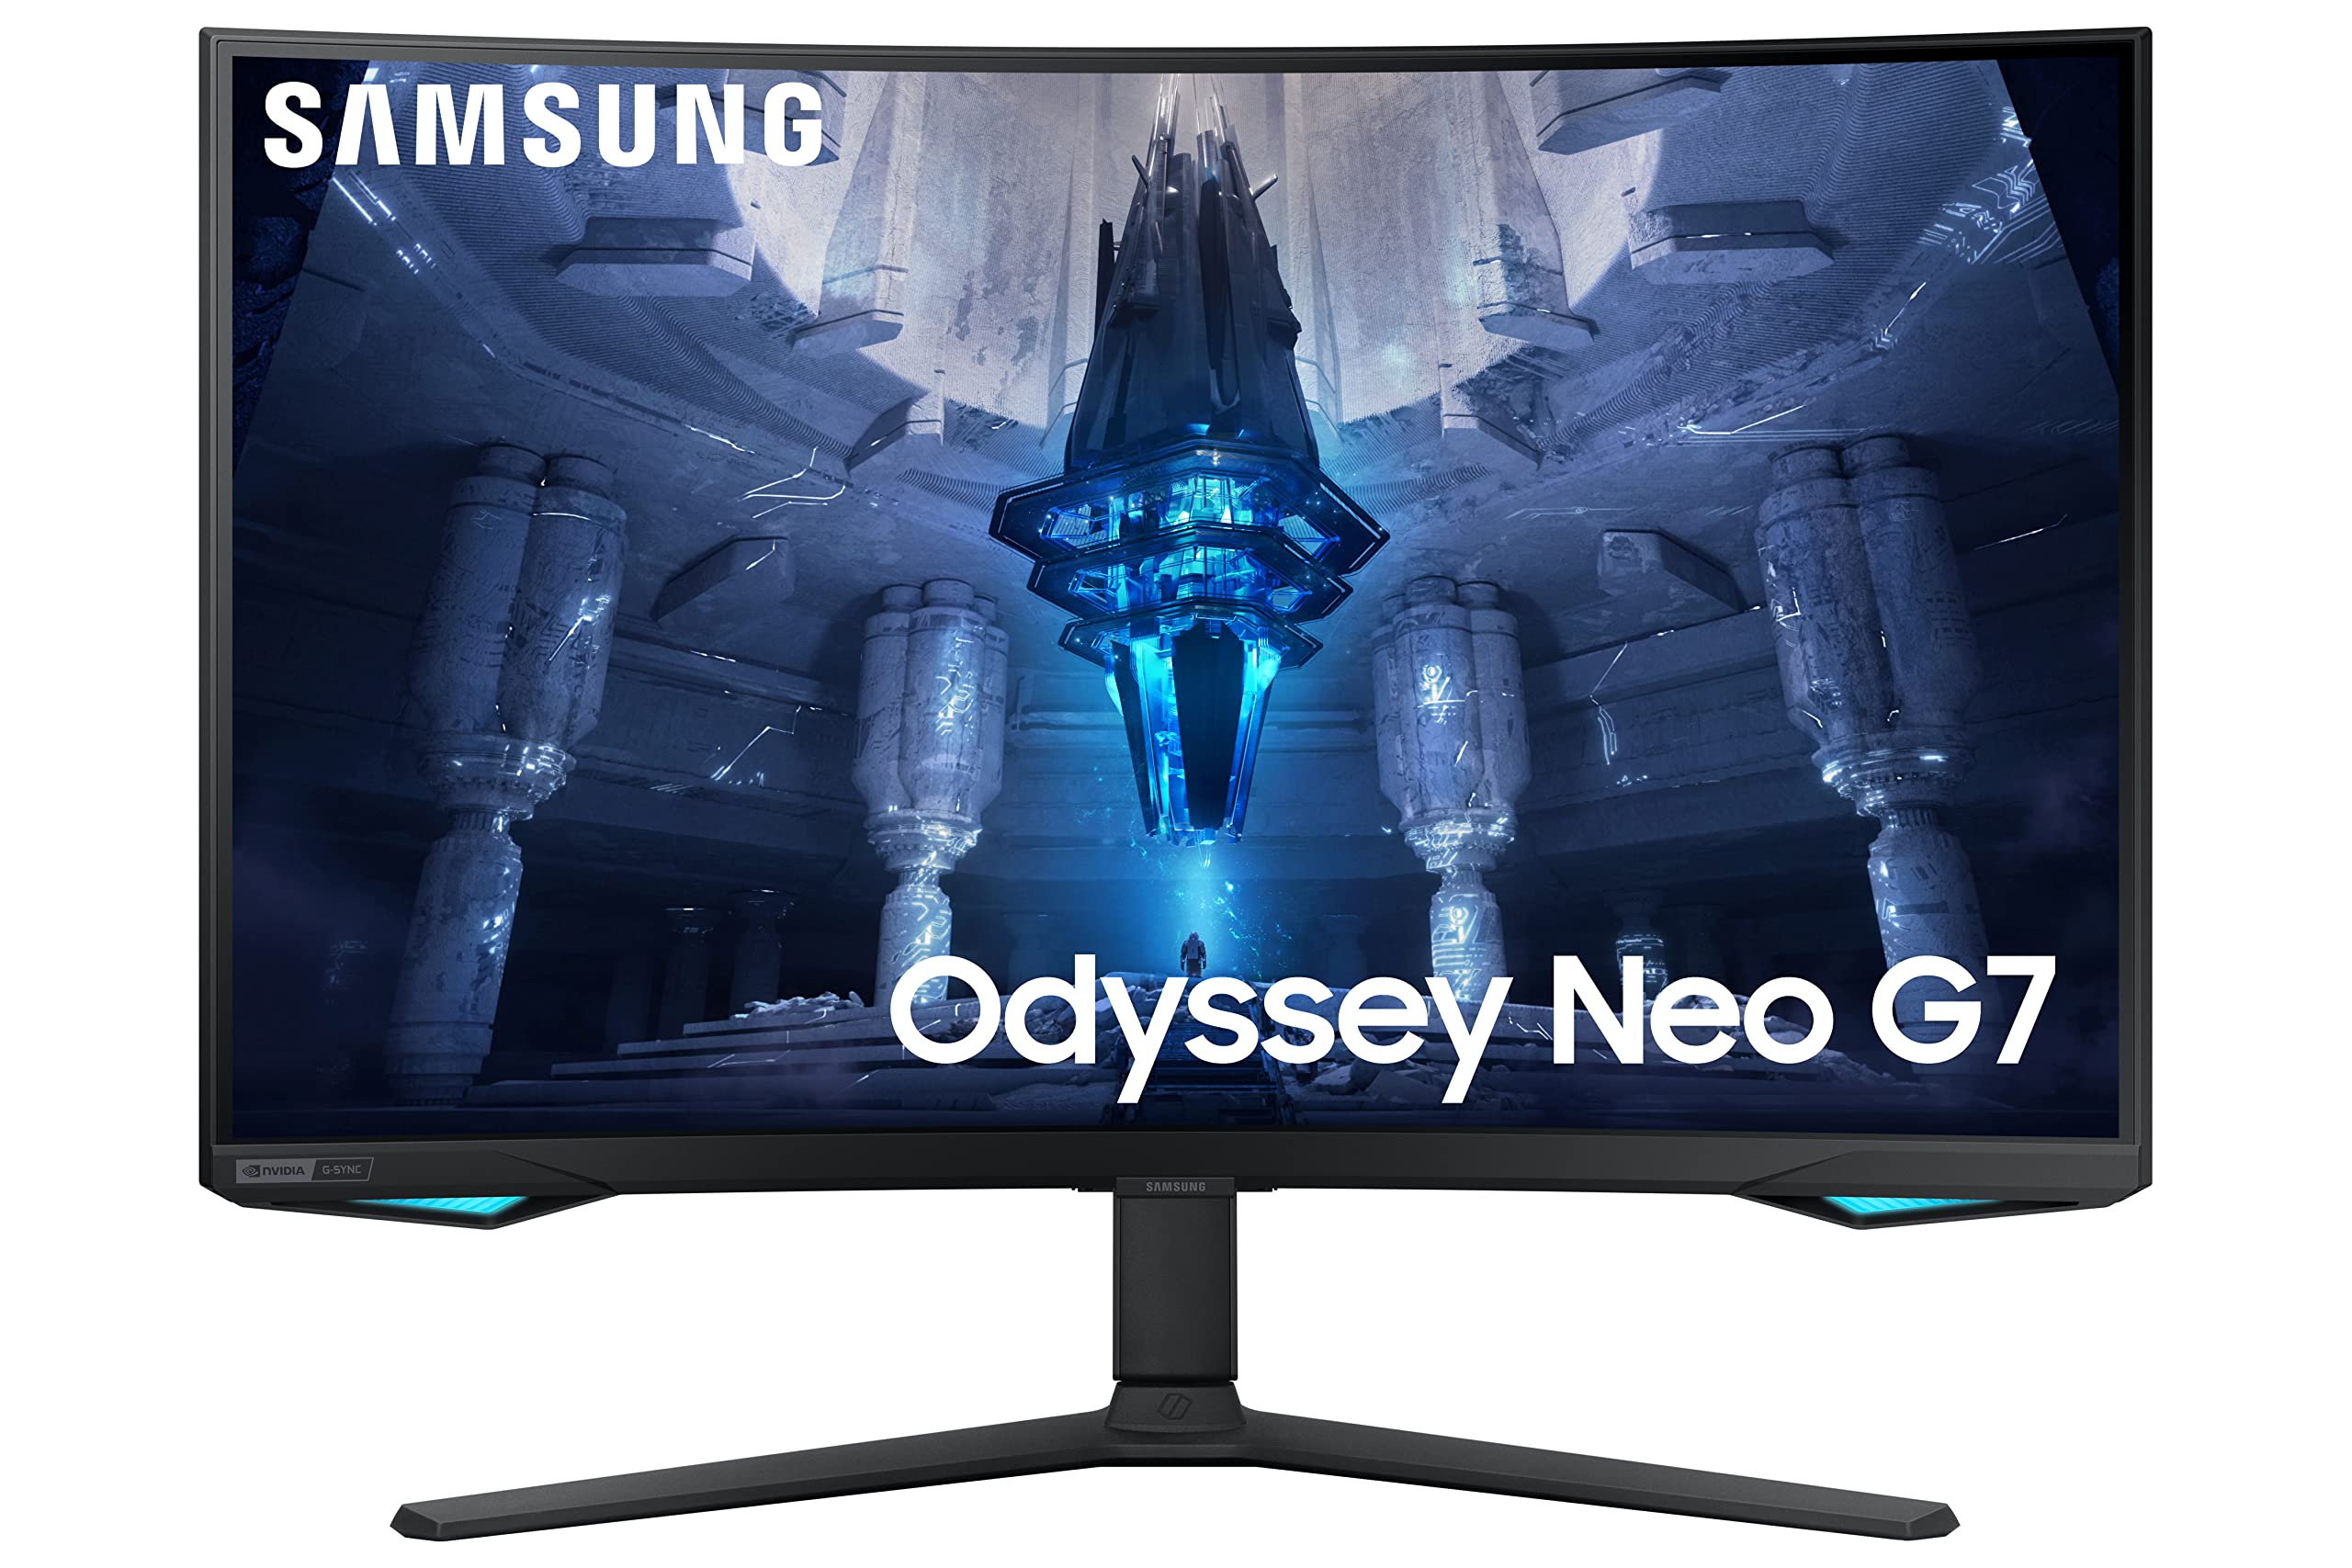 Samsung Odyssey Neo Gaming Monitor, 4K UHD Mini LED Display, Curved Screen, 240Hz, 1ms, G-Sync and FreeSync Premium Pro